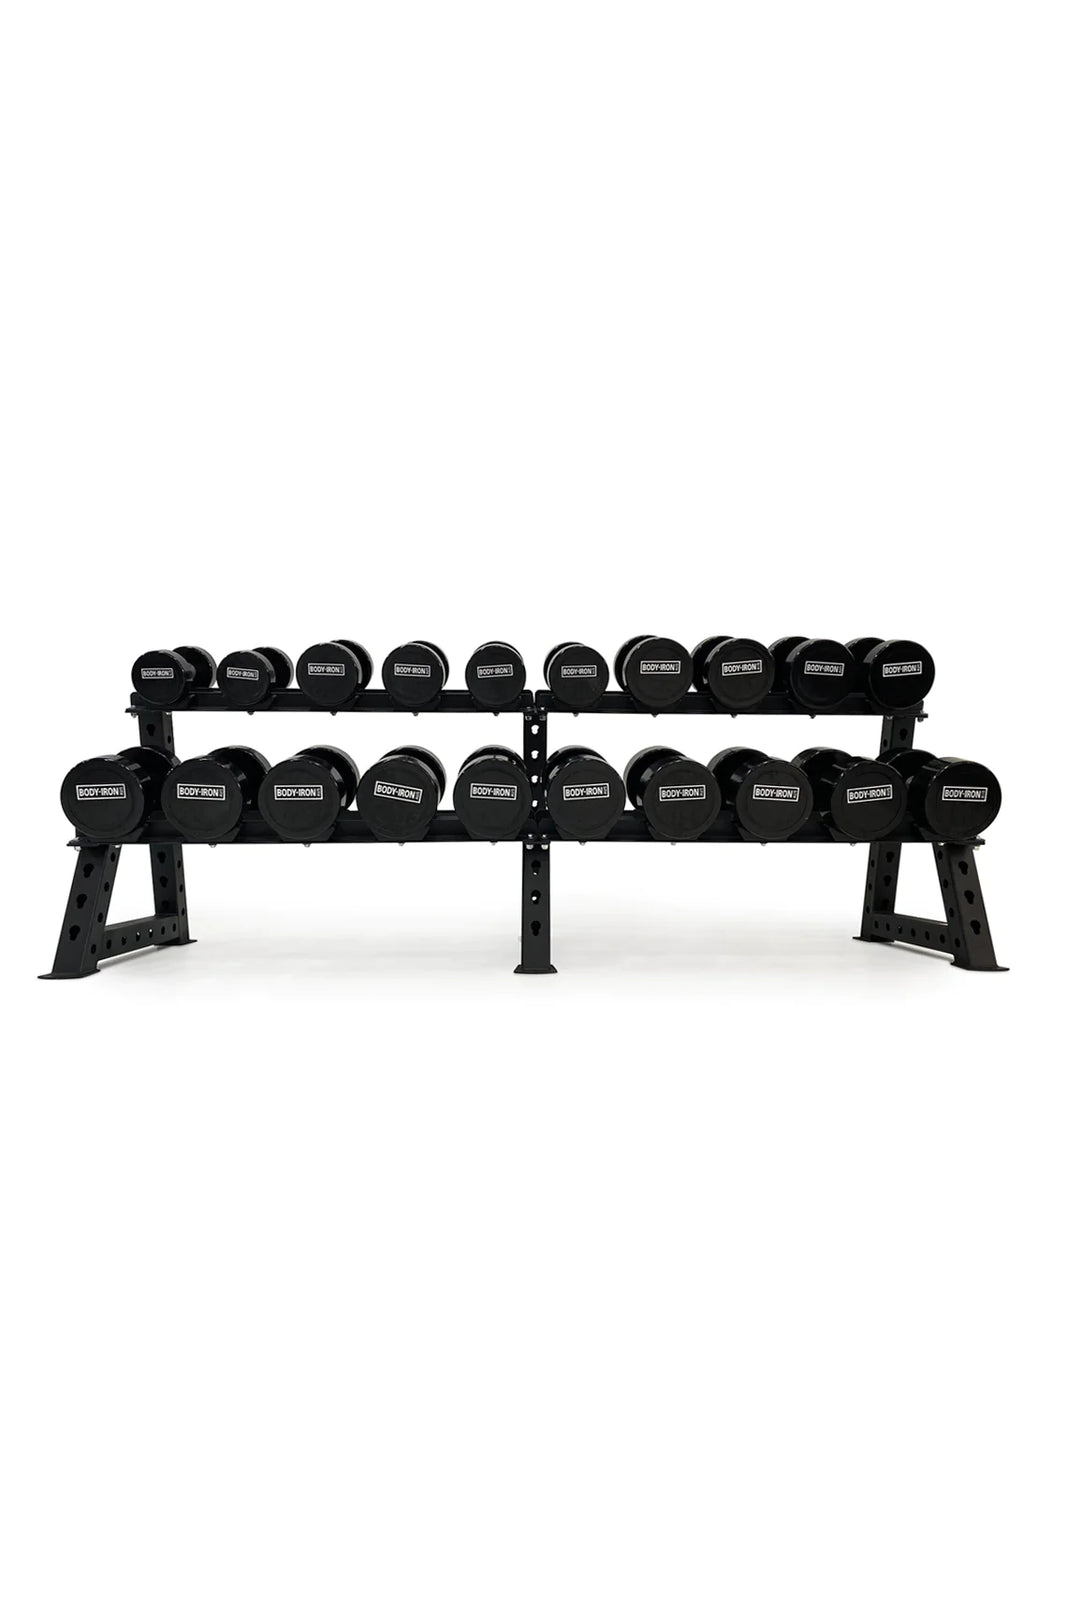 Body Iron 585kg Commercial Dumbbell Package